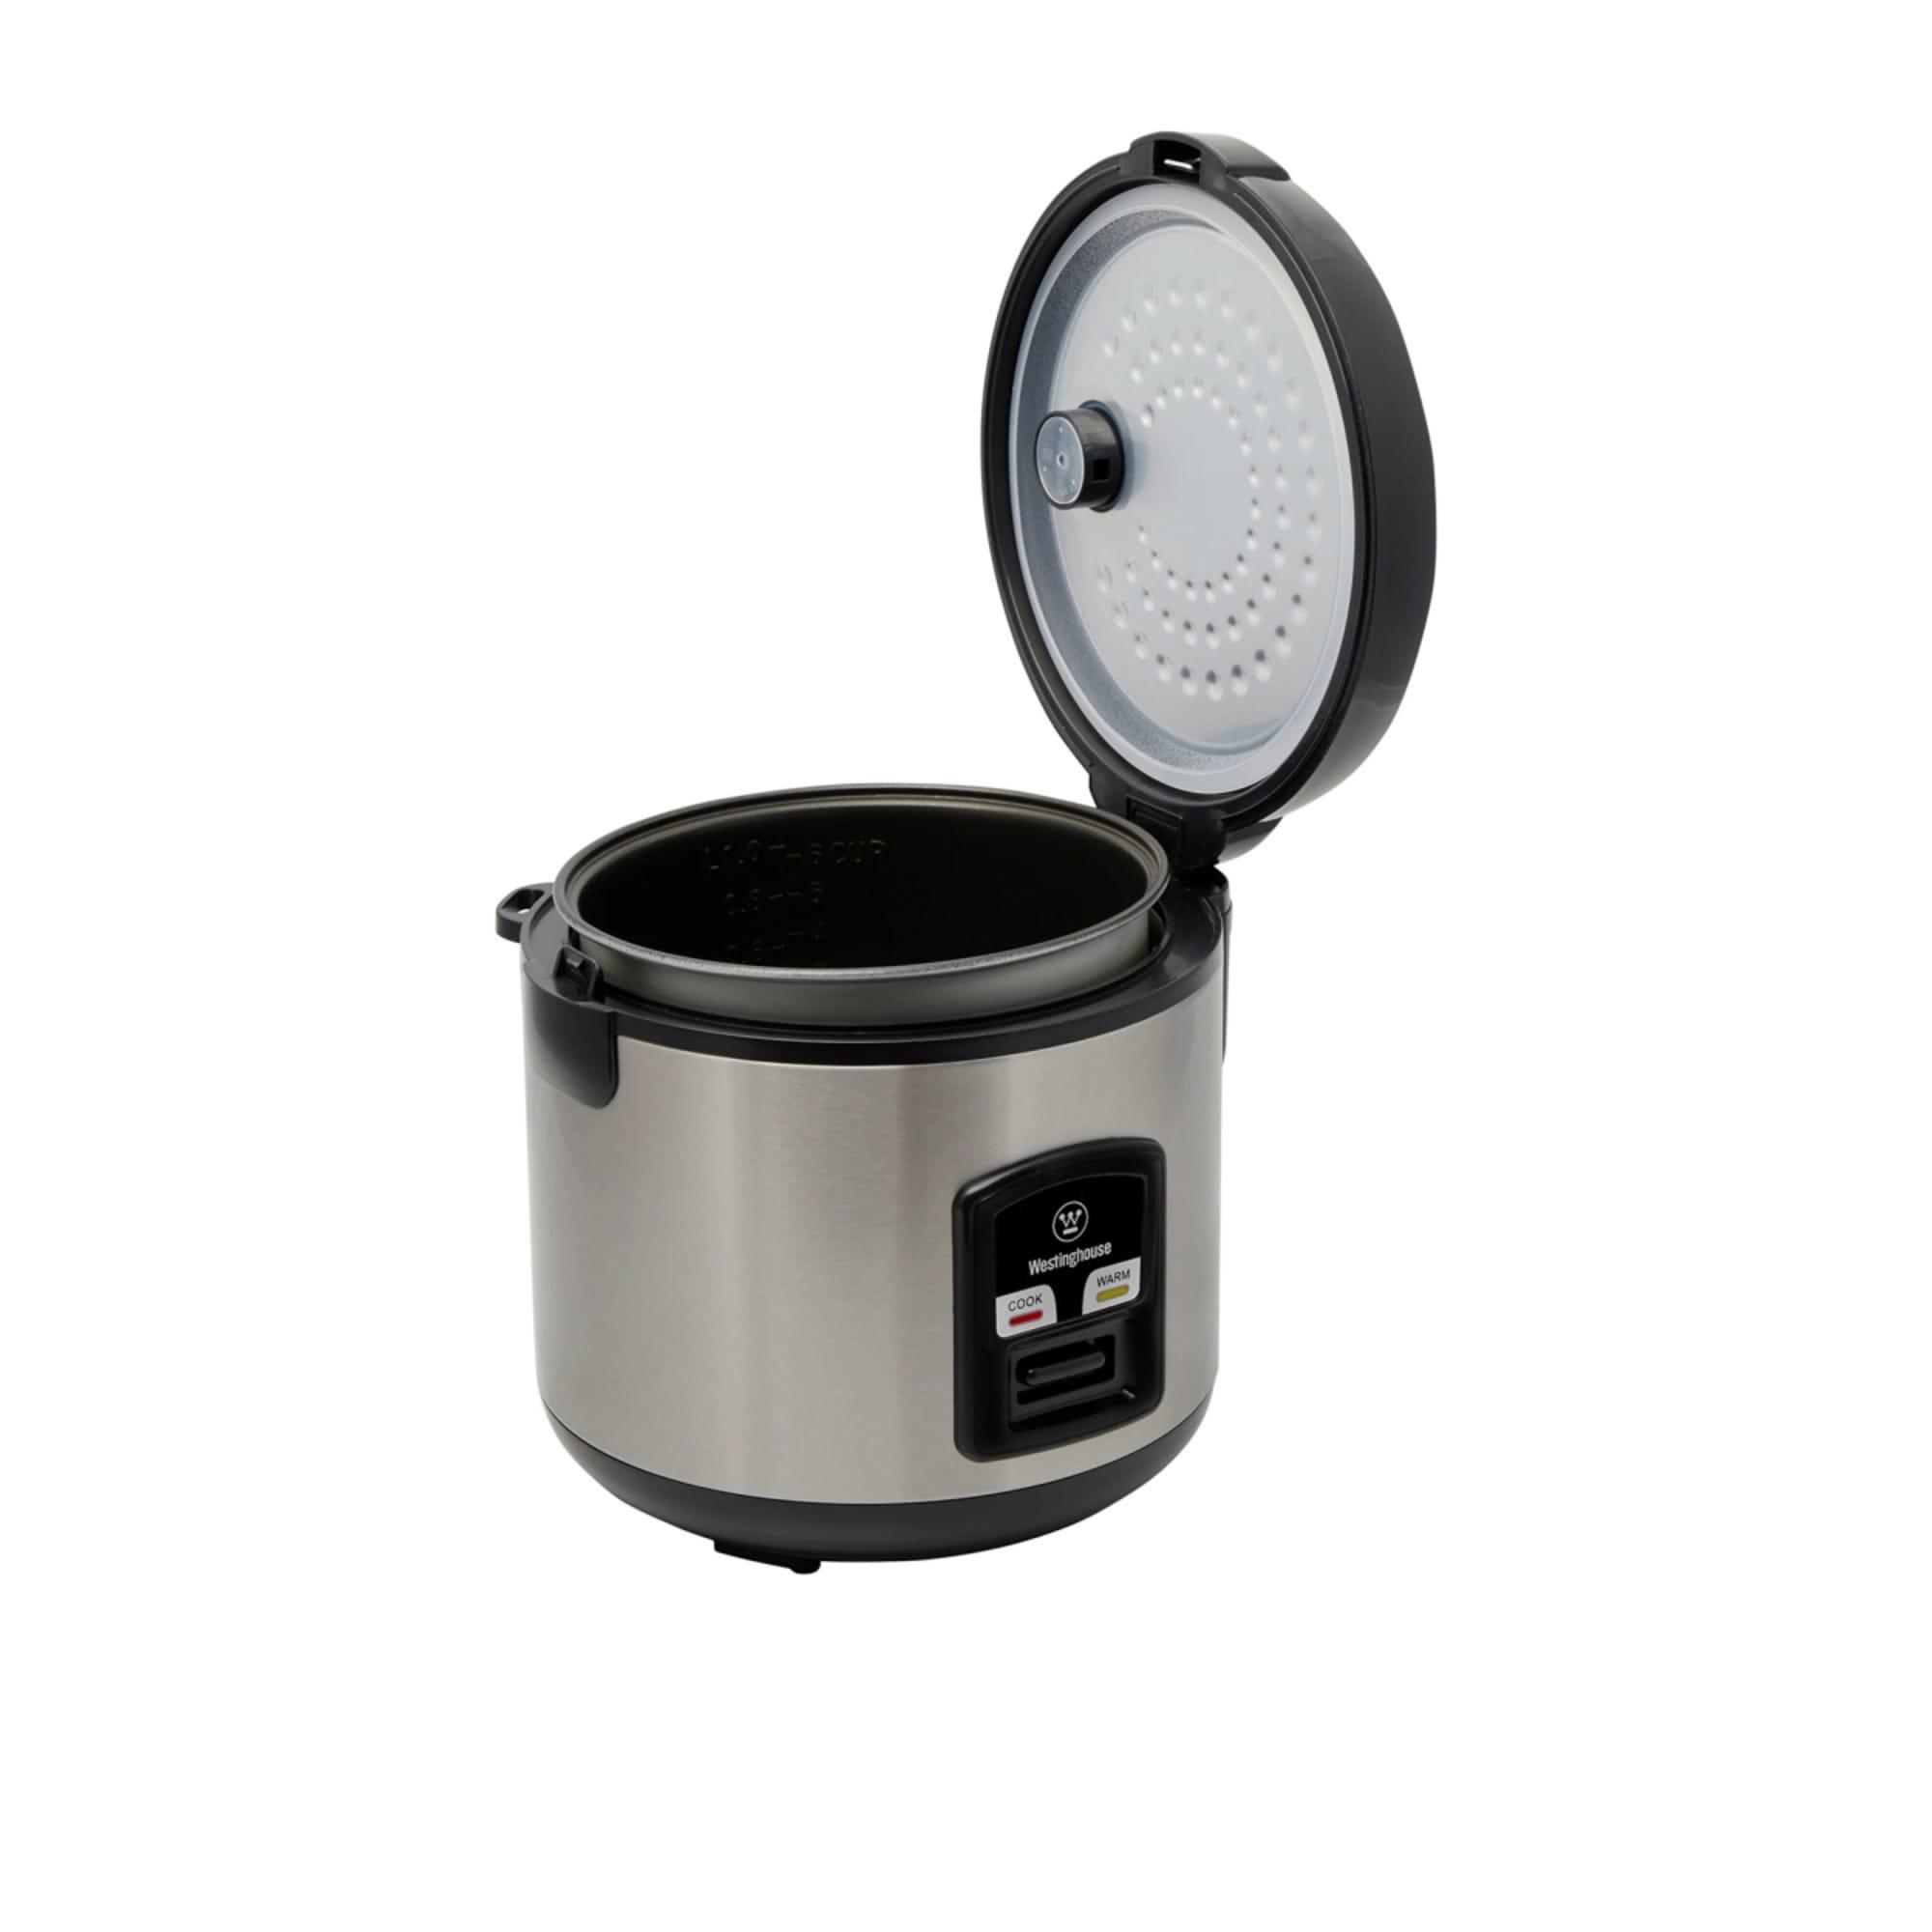 Westinghouse Rice Cooker 6 Cup Image 5